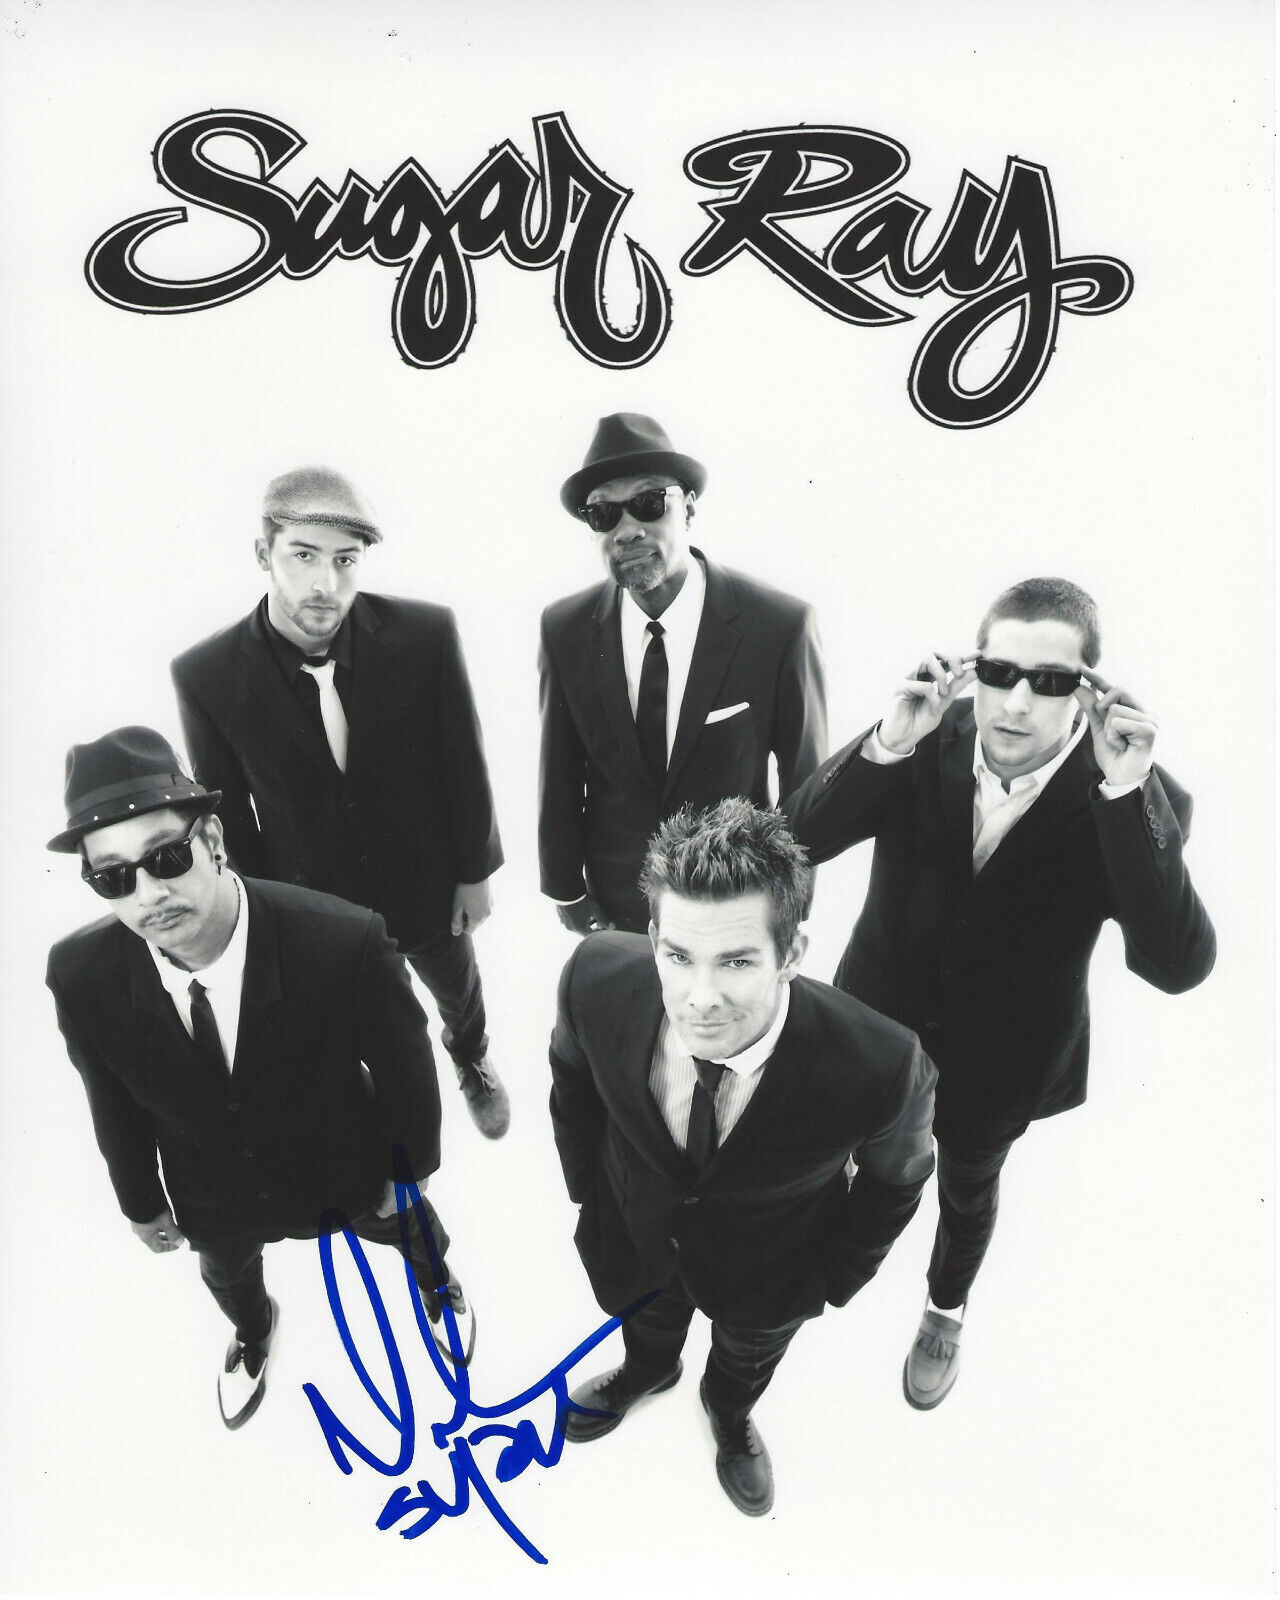 MARK MCGRATH SUGAR RAY LEAD SINGER HAND SIGNED AUTHENTIC 8X10 Photo Poster painting E COA PROOF